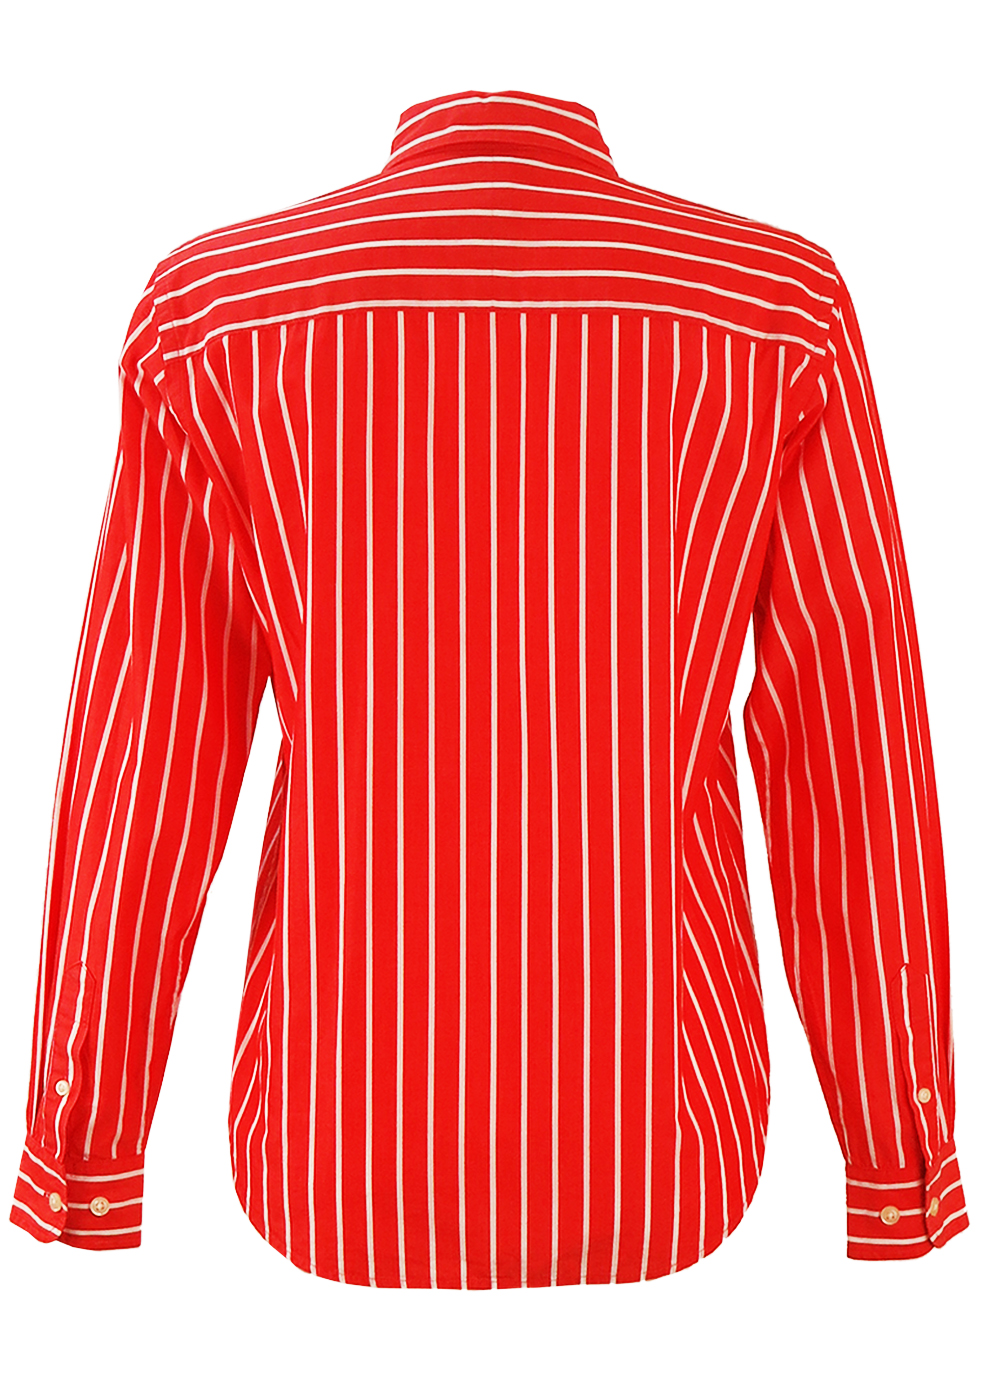 ralph lauren red and white striped shirt